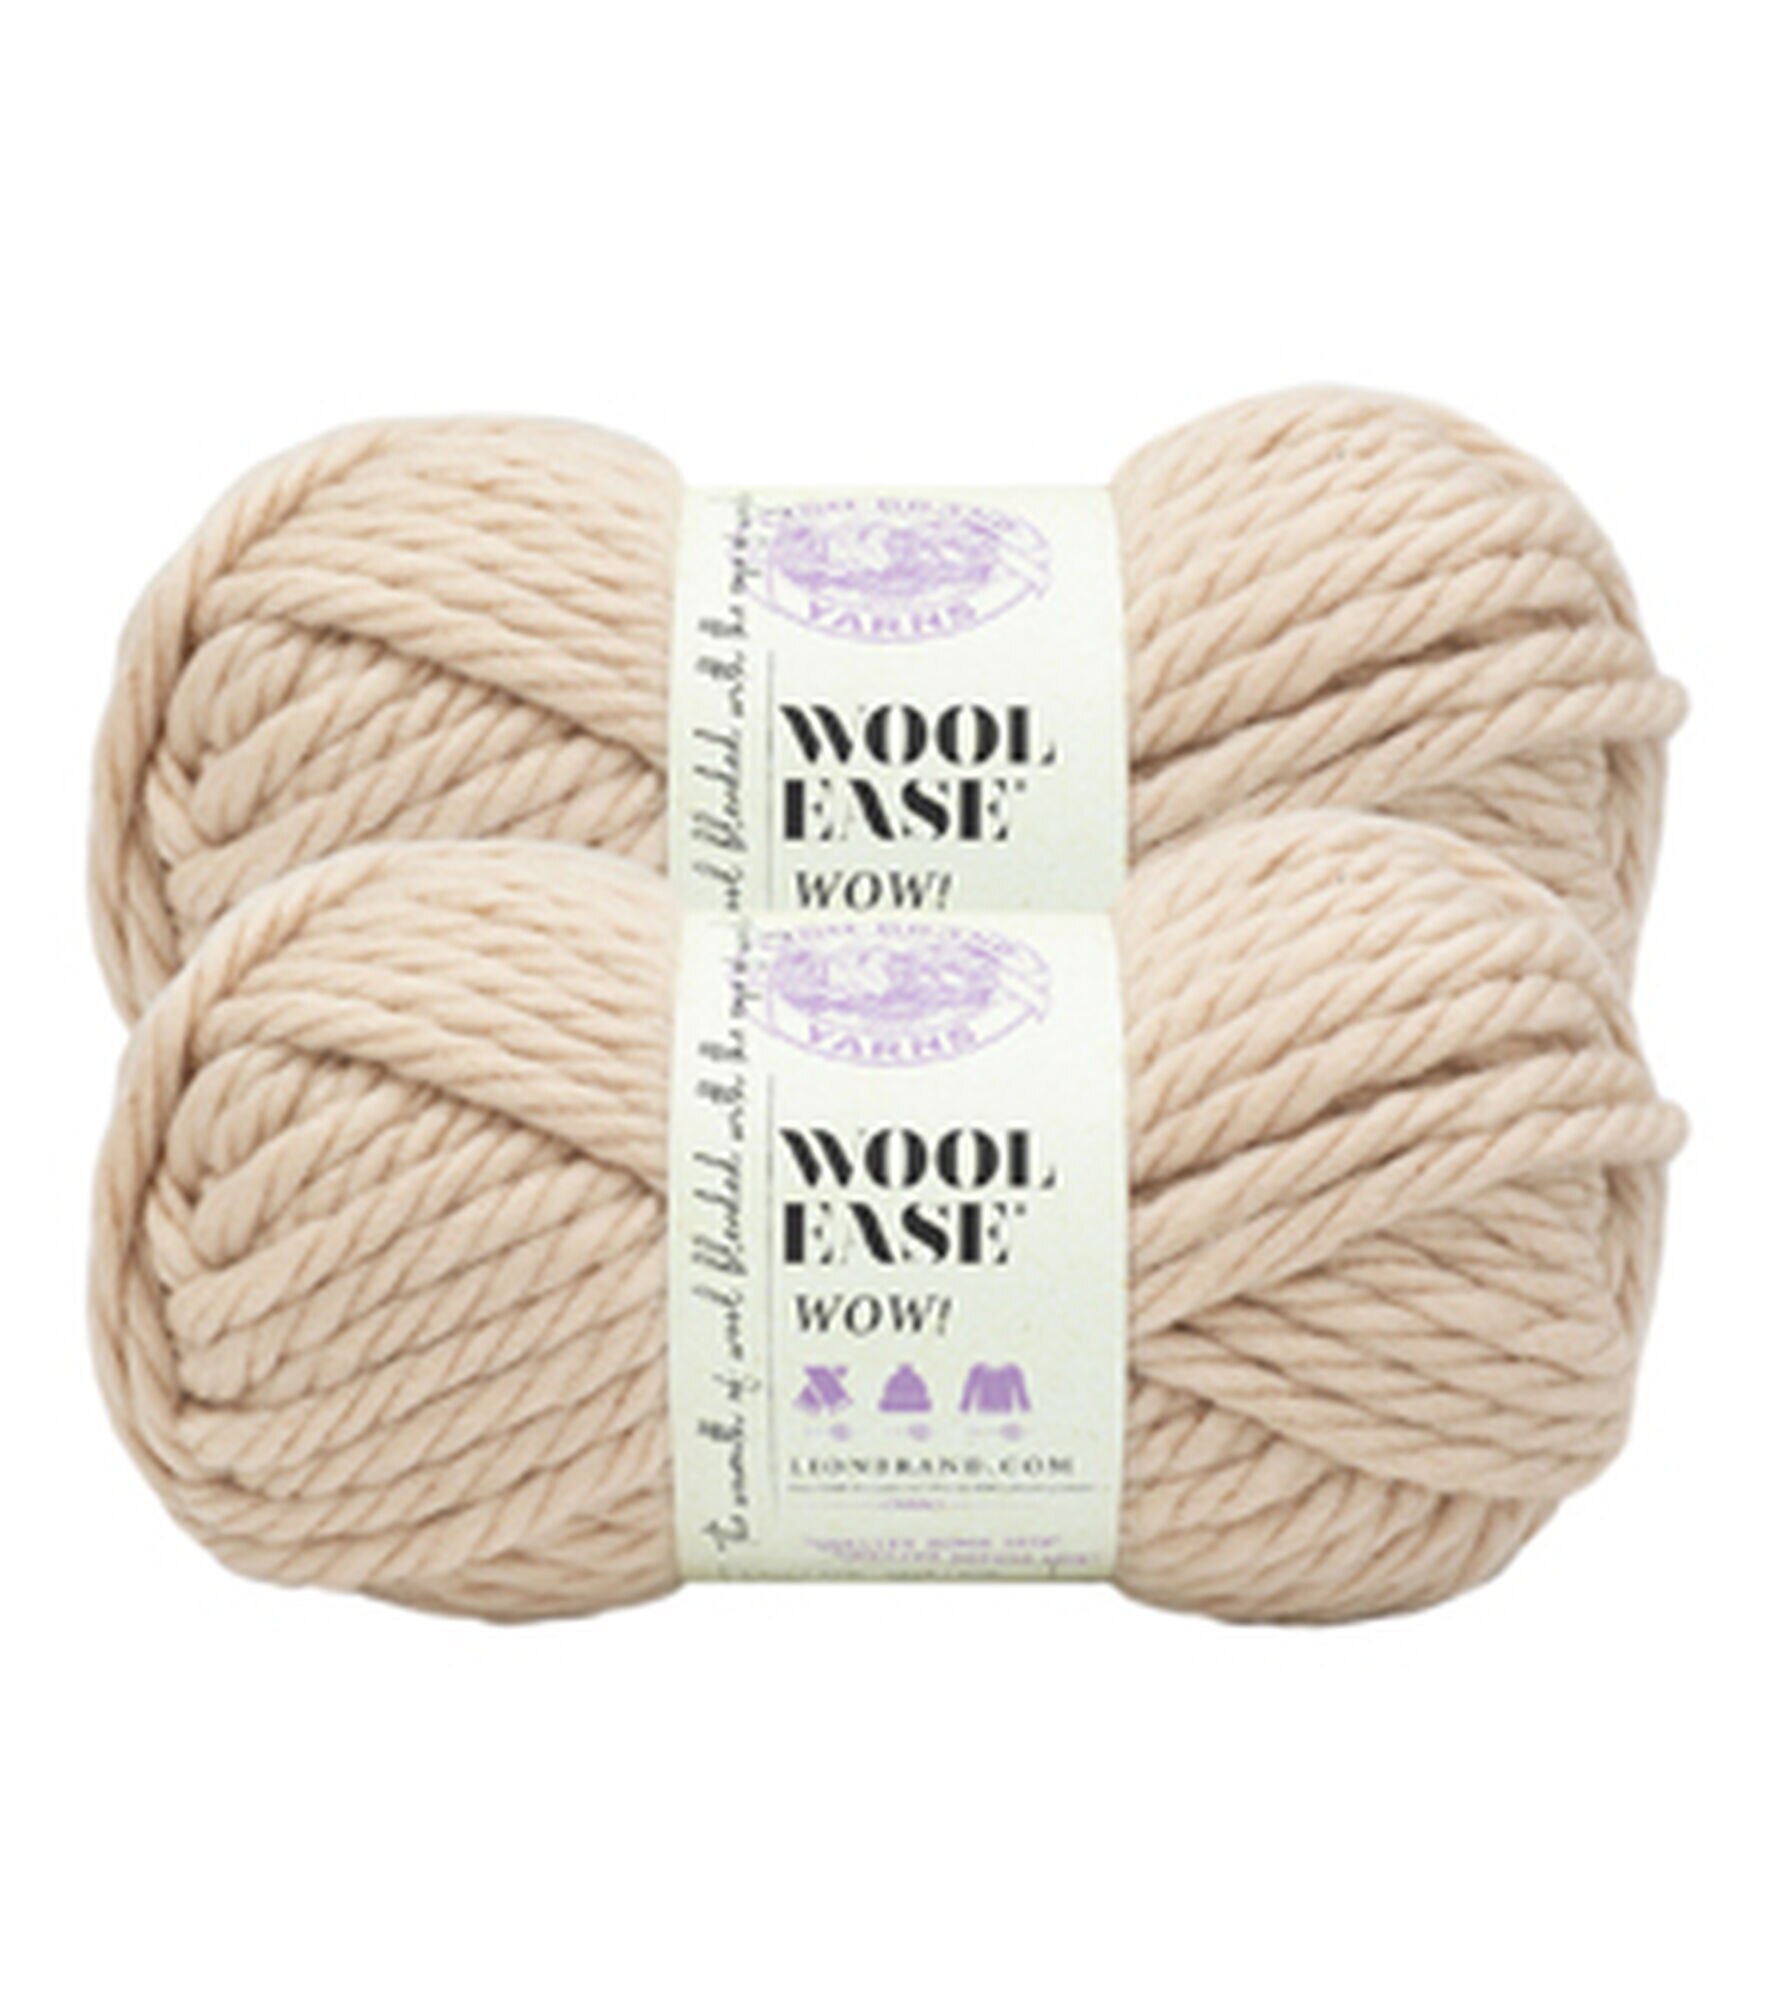 Lion Brand Yarn - Wool-Ease Wow! Jumbo #7-2 Pack with Pattern